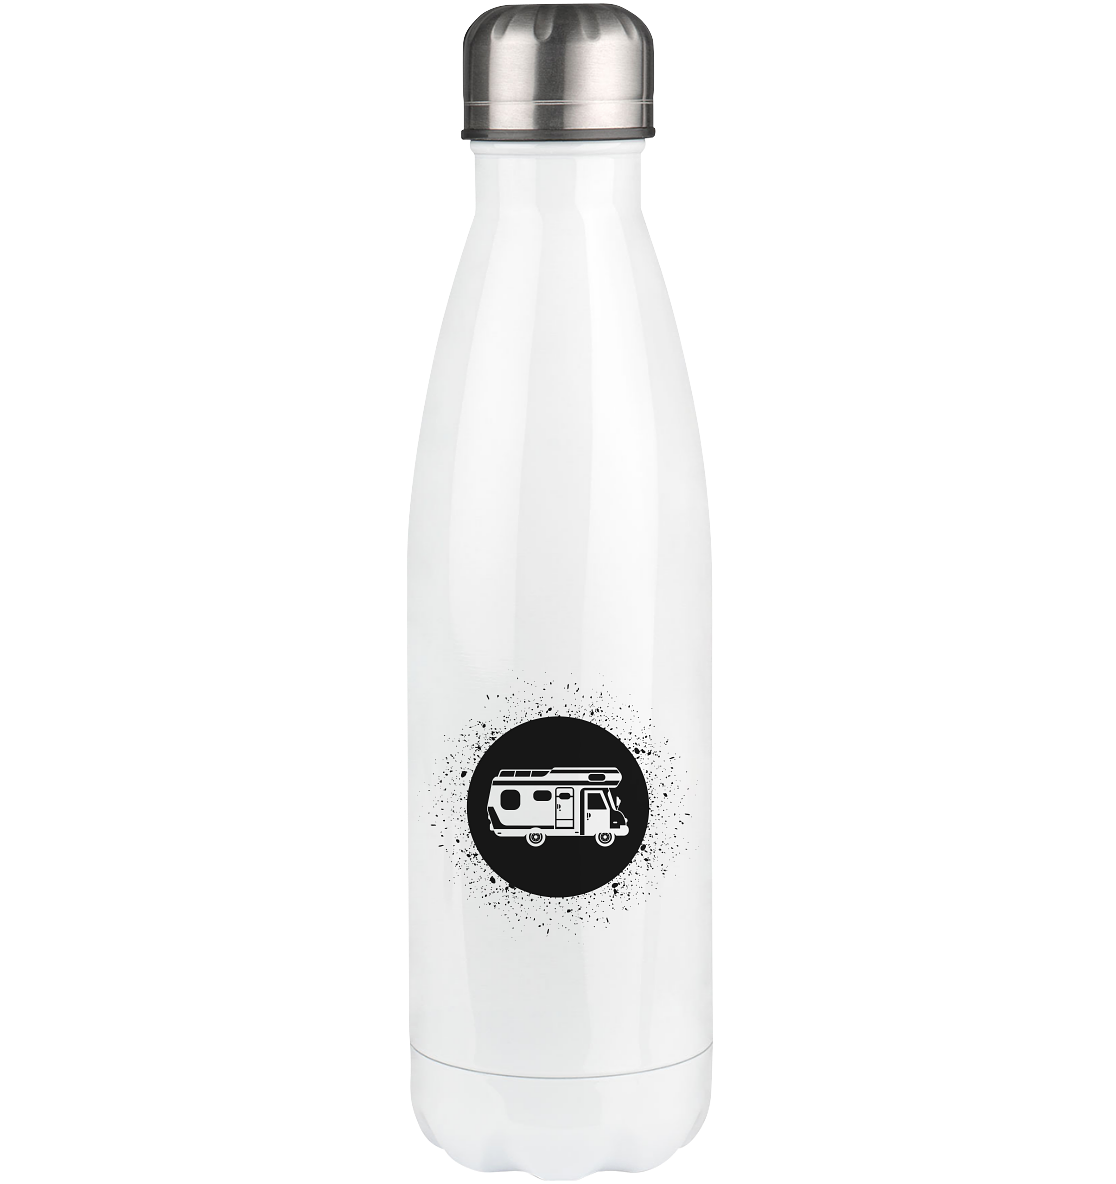 Circle with Splash and Camping - Edelstahl Thermosflasche camping 500ml